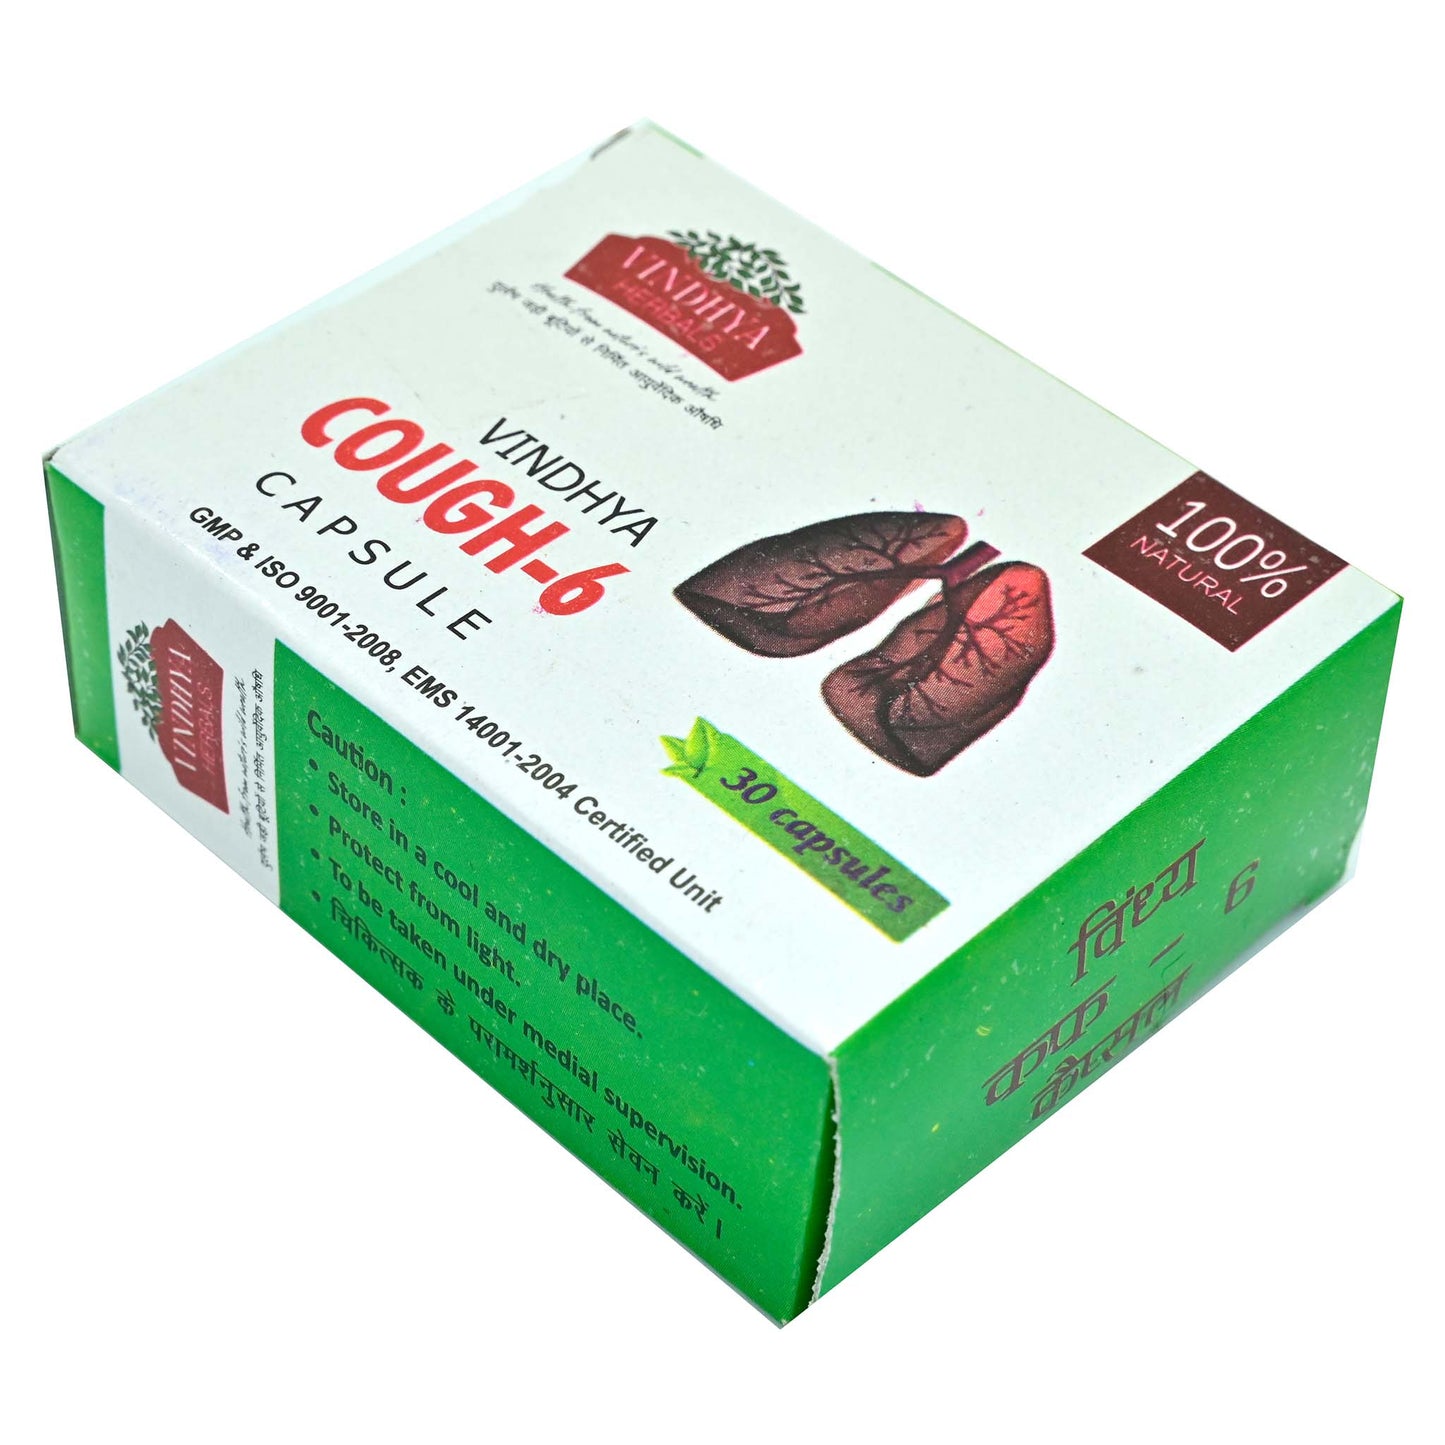 Cough-6 Capsule - Natural Relief for Cough and Cold